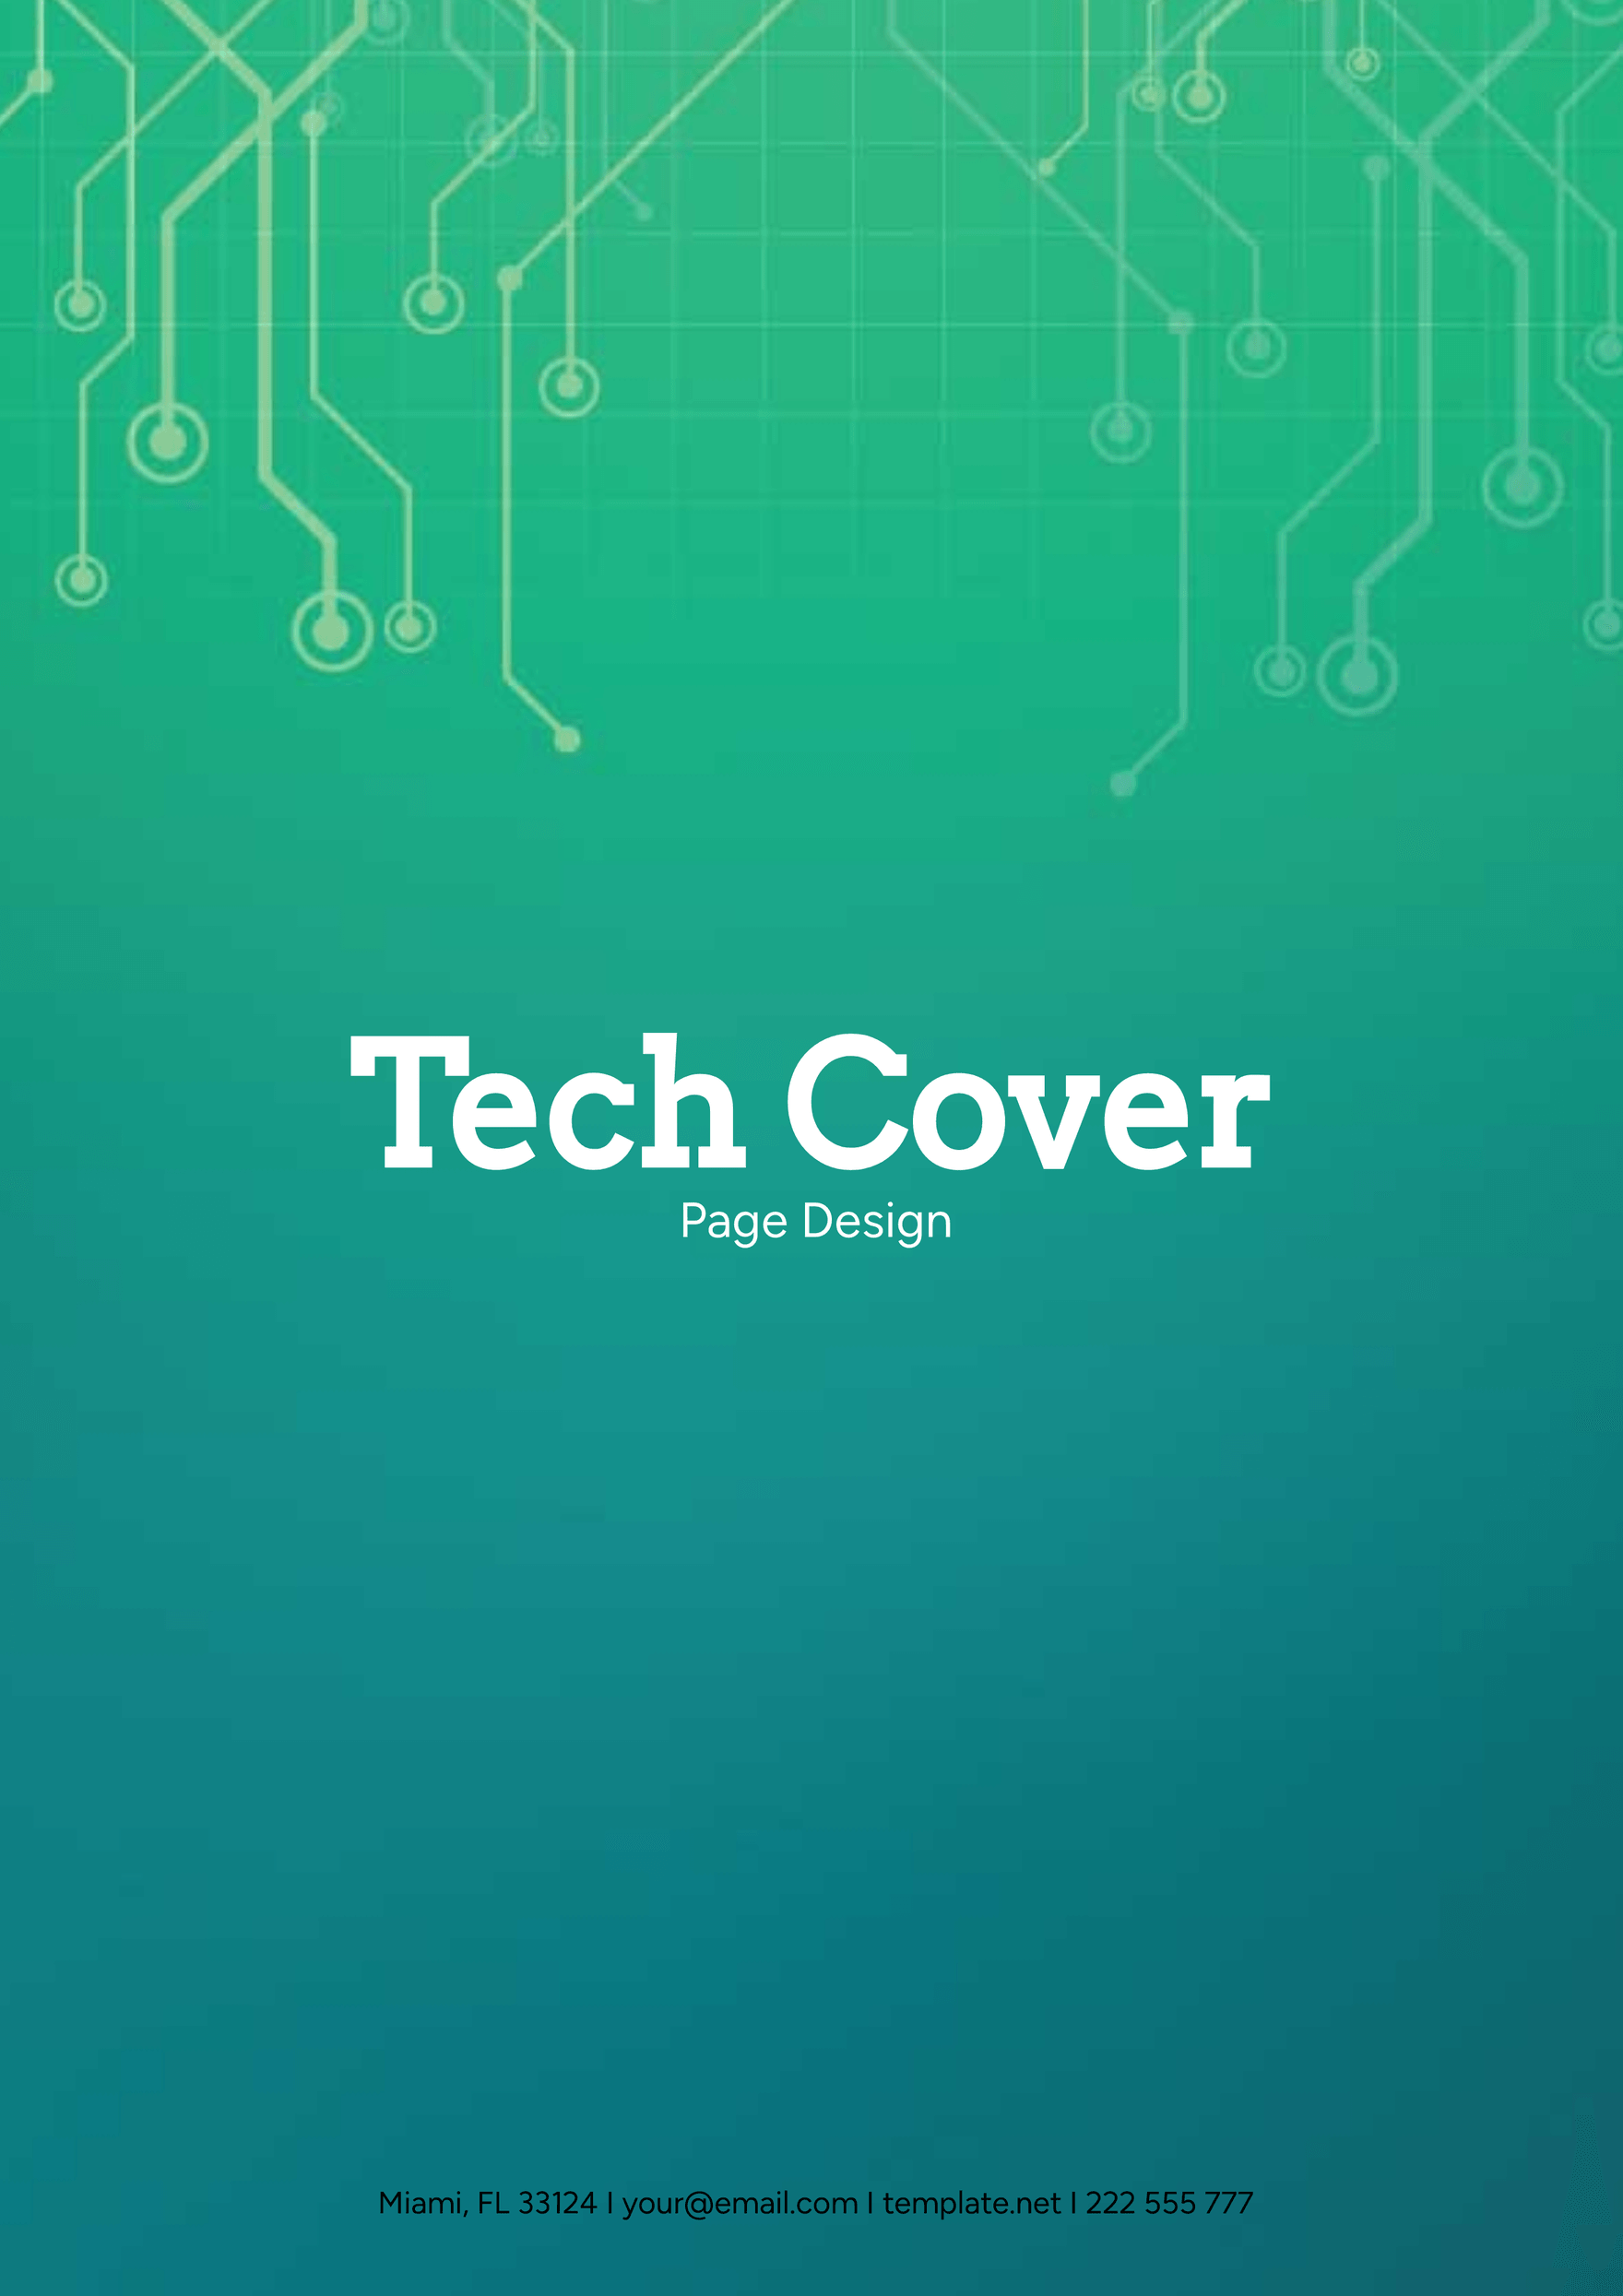 Tech Cover Page Design - Edit Online & Download Example